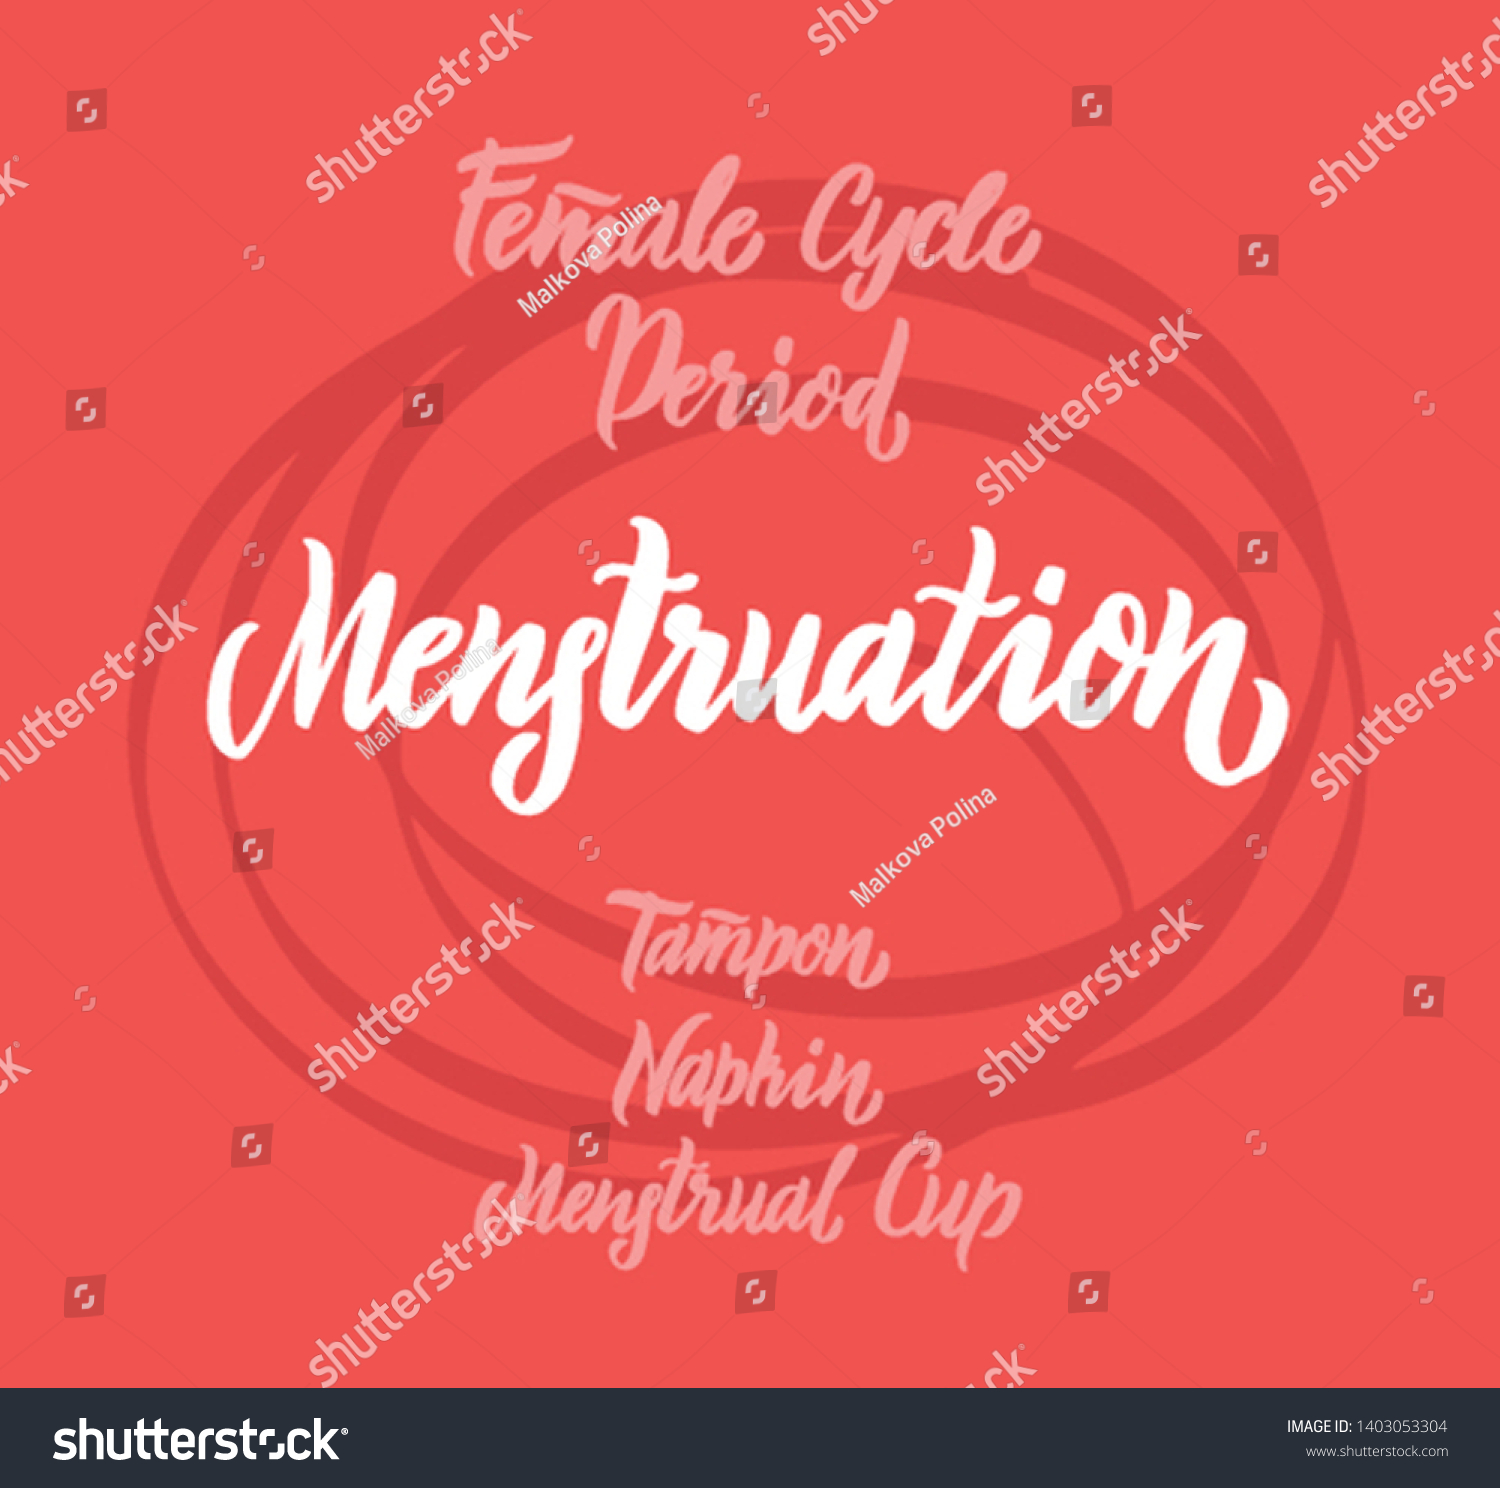 Menstruation Hand Written Lettering Words Period Stock Vector Royalty Free 1403053304 1597